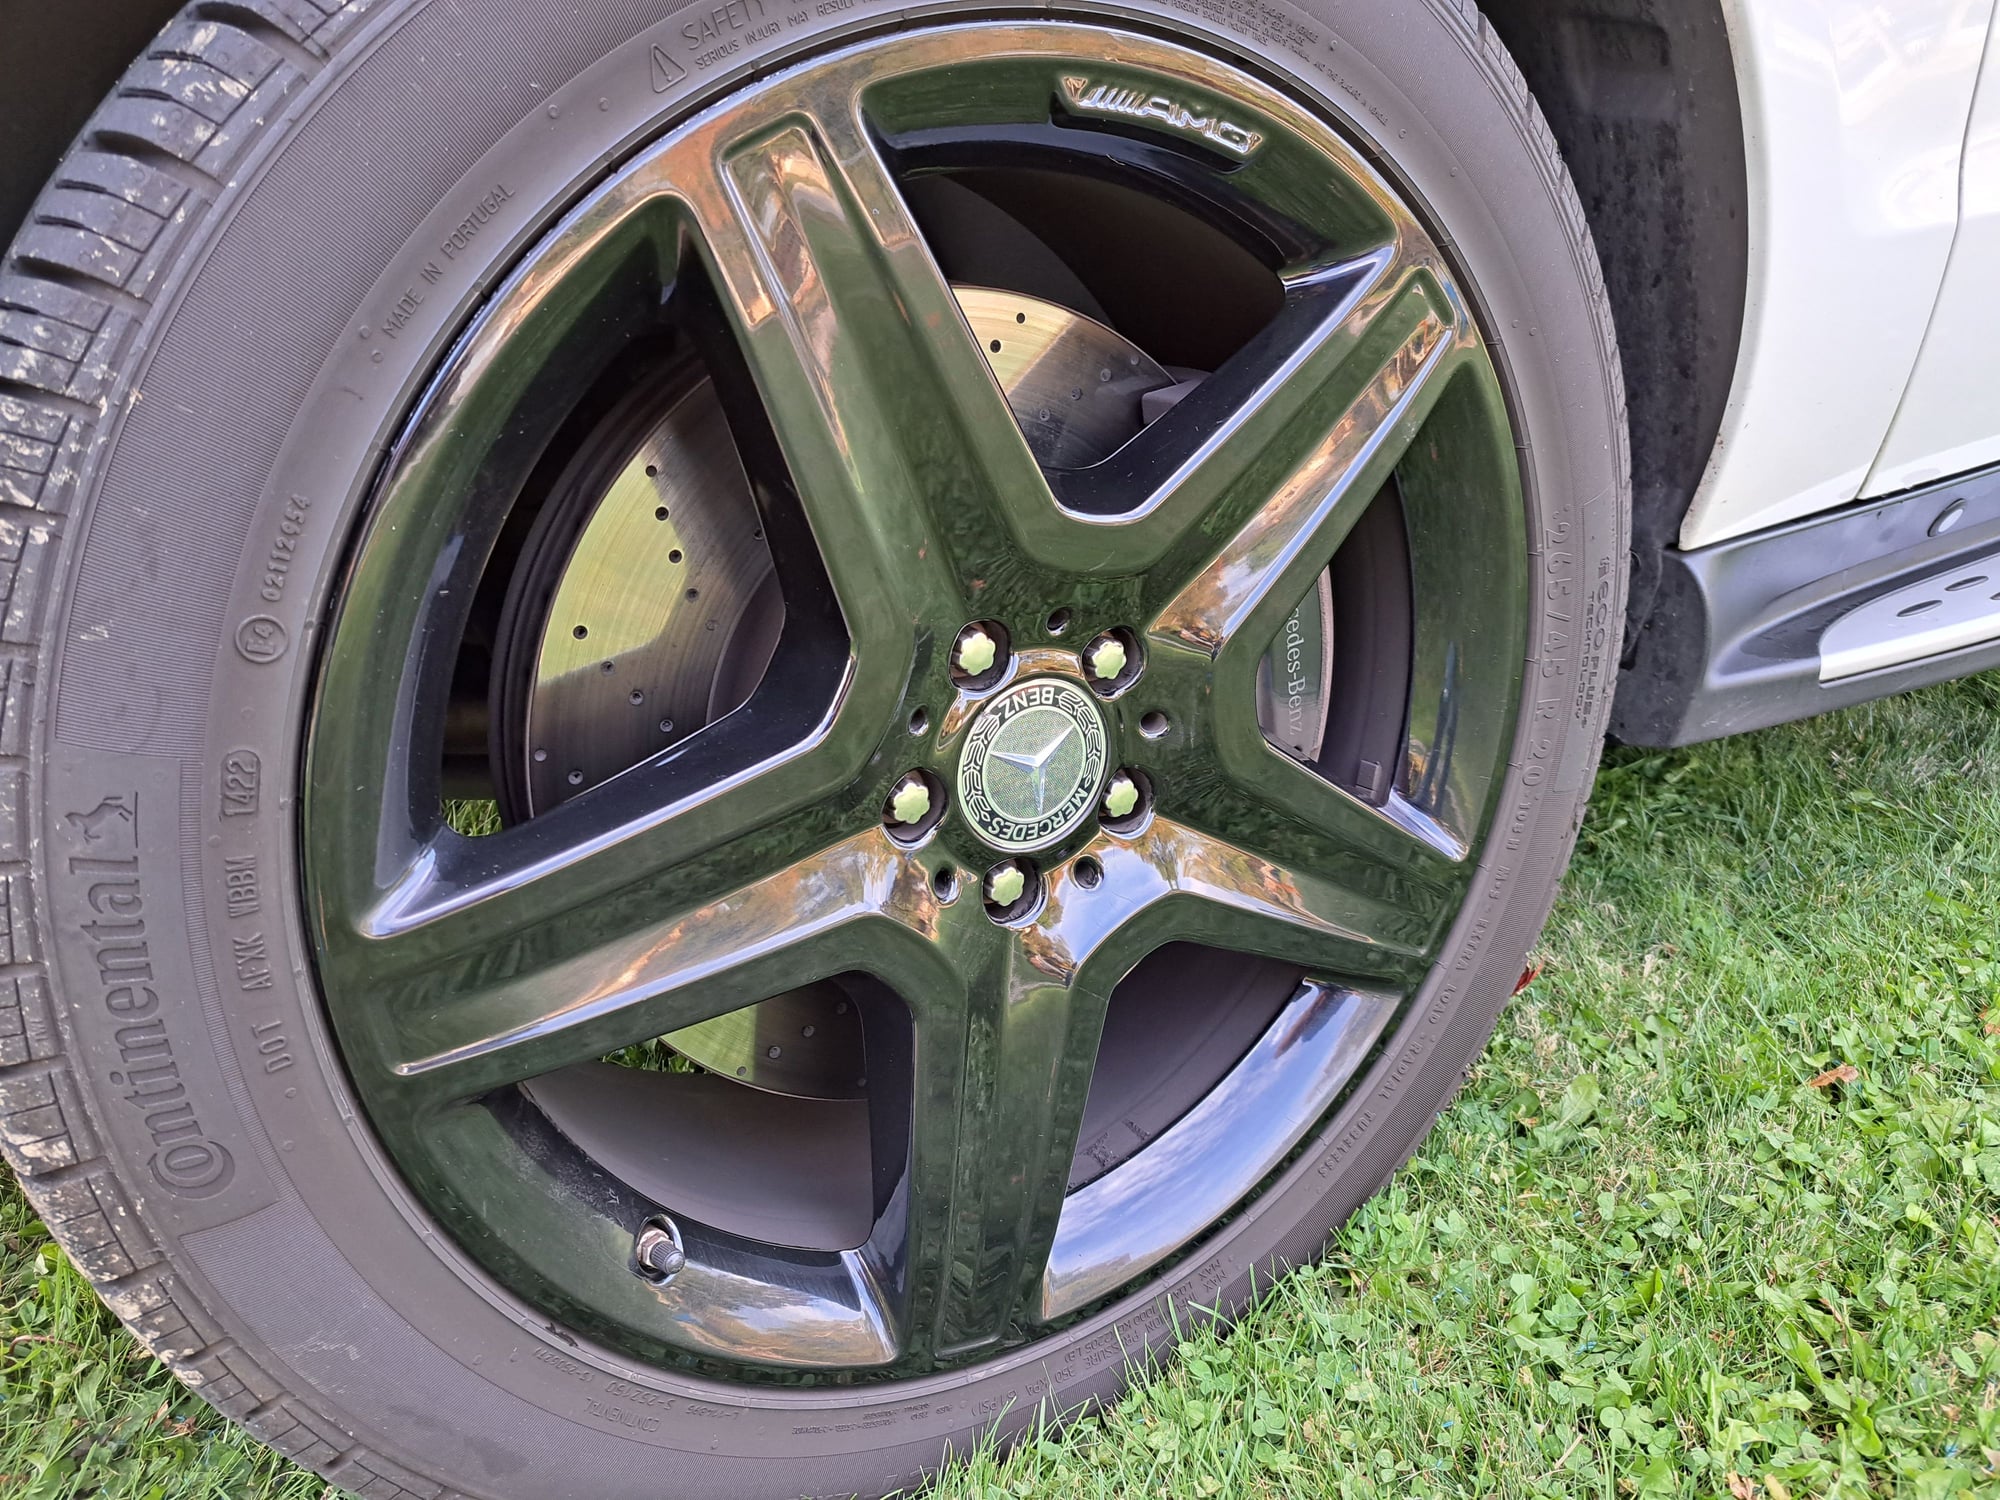 Wheels and Tires/Axles - 20 inch Mercedes AMG Wheels Black. Excellent Condition.  ML GLE GLS Other Models - Used - 2012 to 2018 Mercedes-Benz ML63 AMG - 2016 to 2019 Mercedes-Benz GLE63 AMG - 2012 to 2019 Mercedes-Benz GLS550 - Cleveland, OH 44145, United States